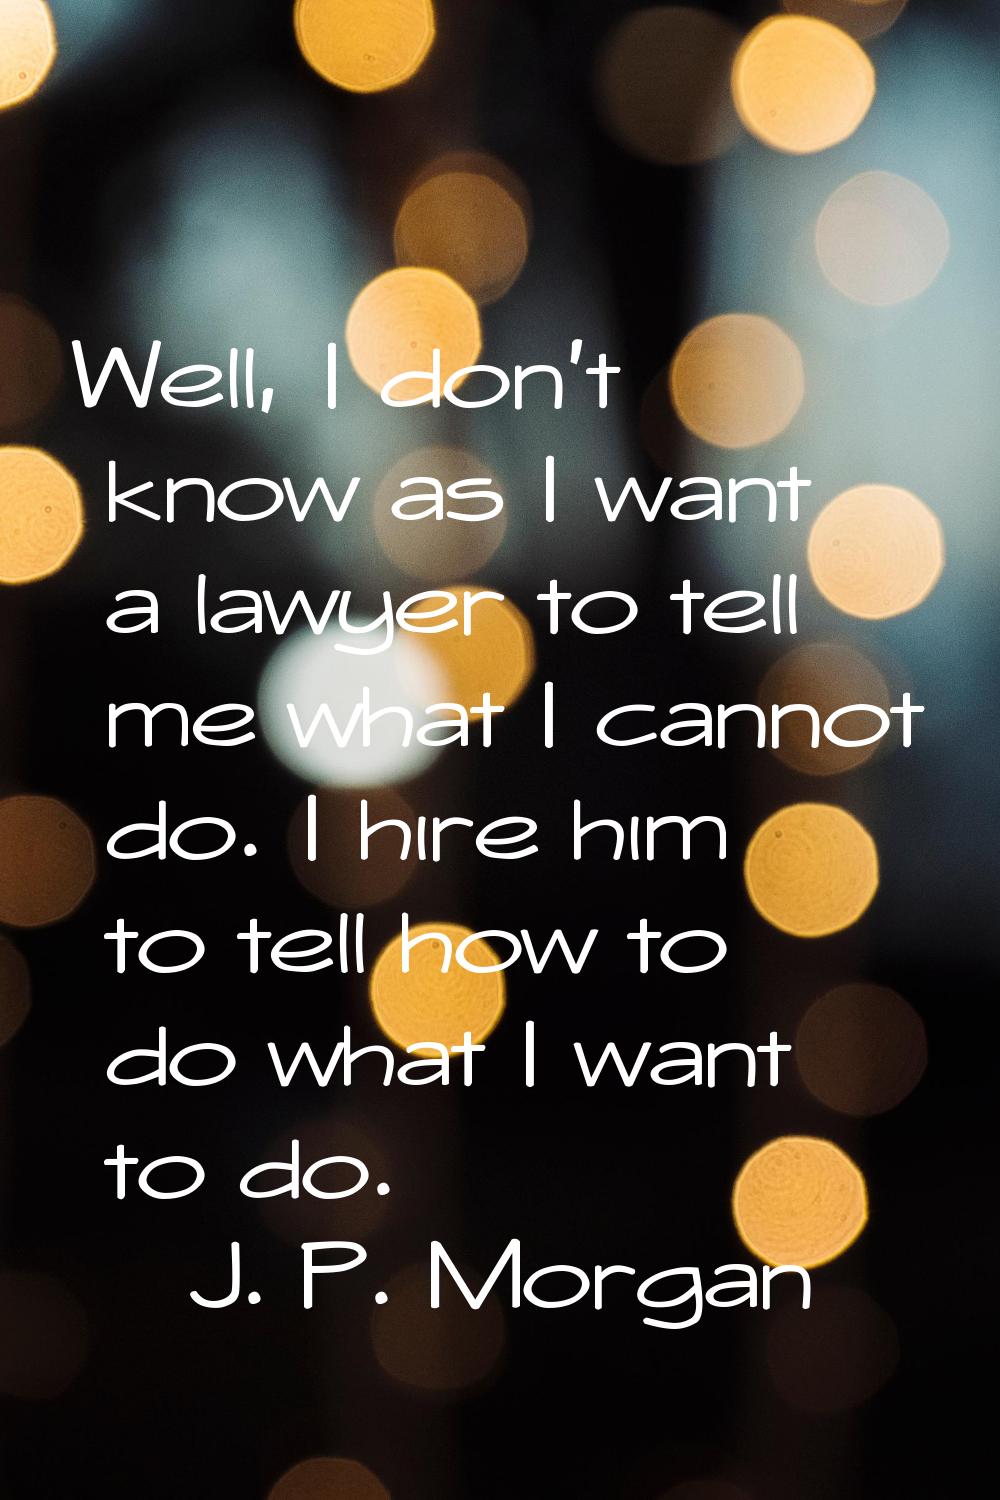 Well, I don't know as I want a lawyer to tell me what I cannot do. I hire him to tell how to do wha